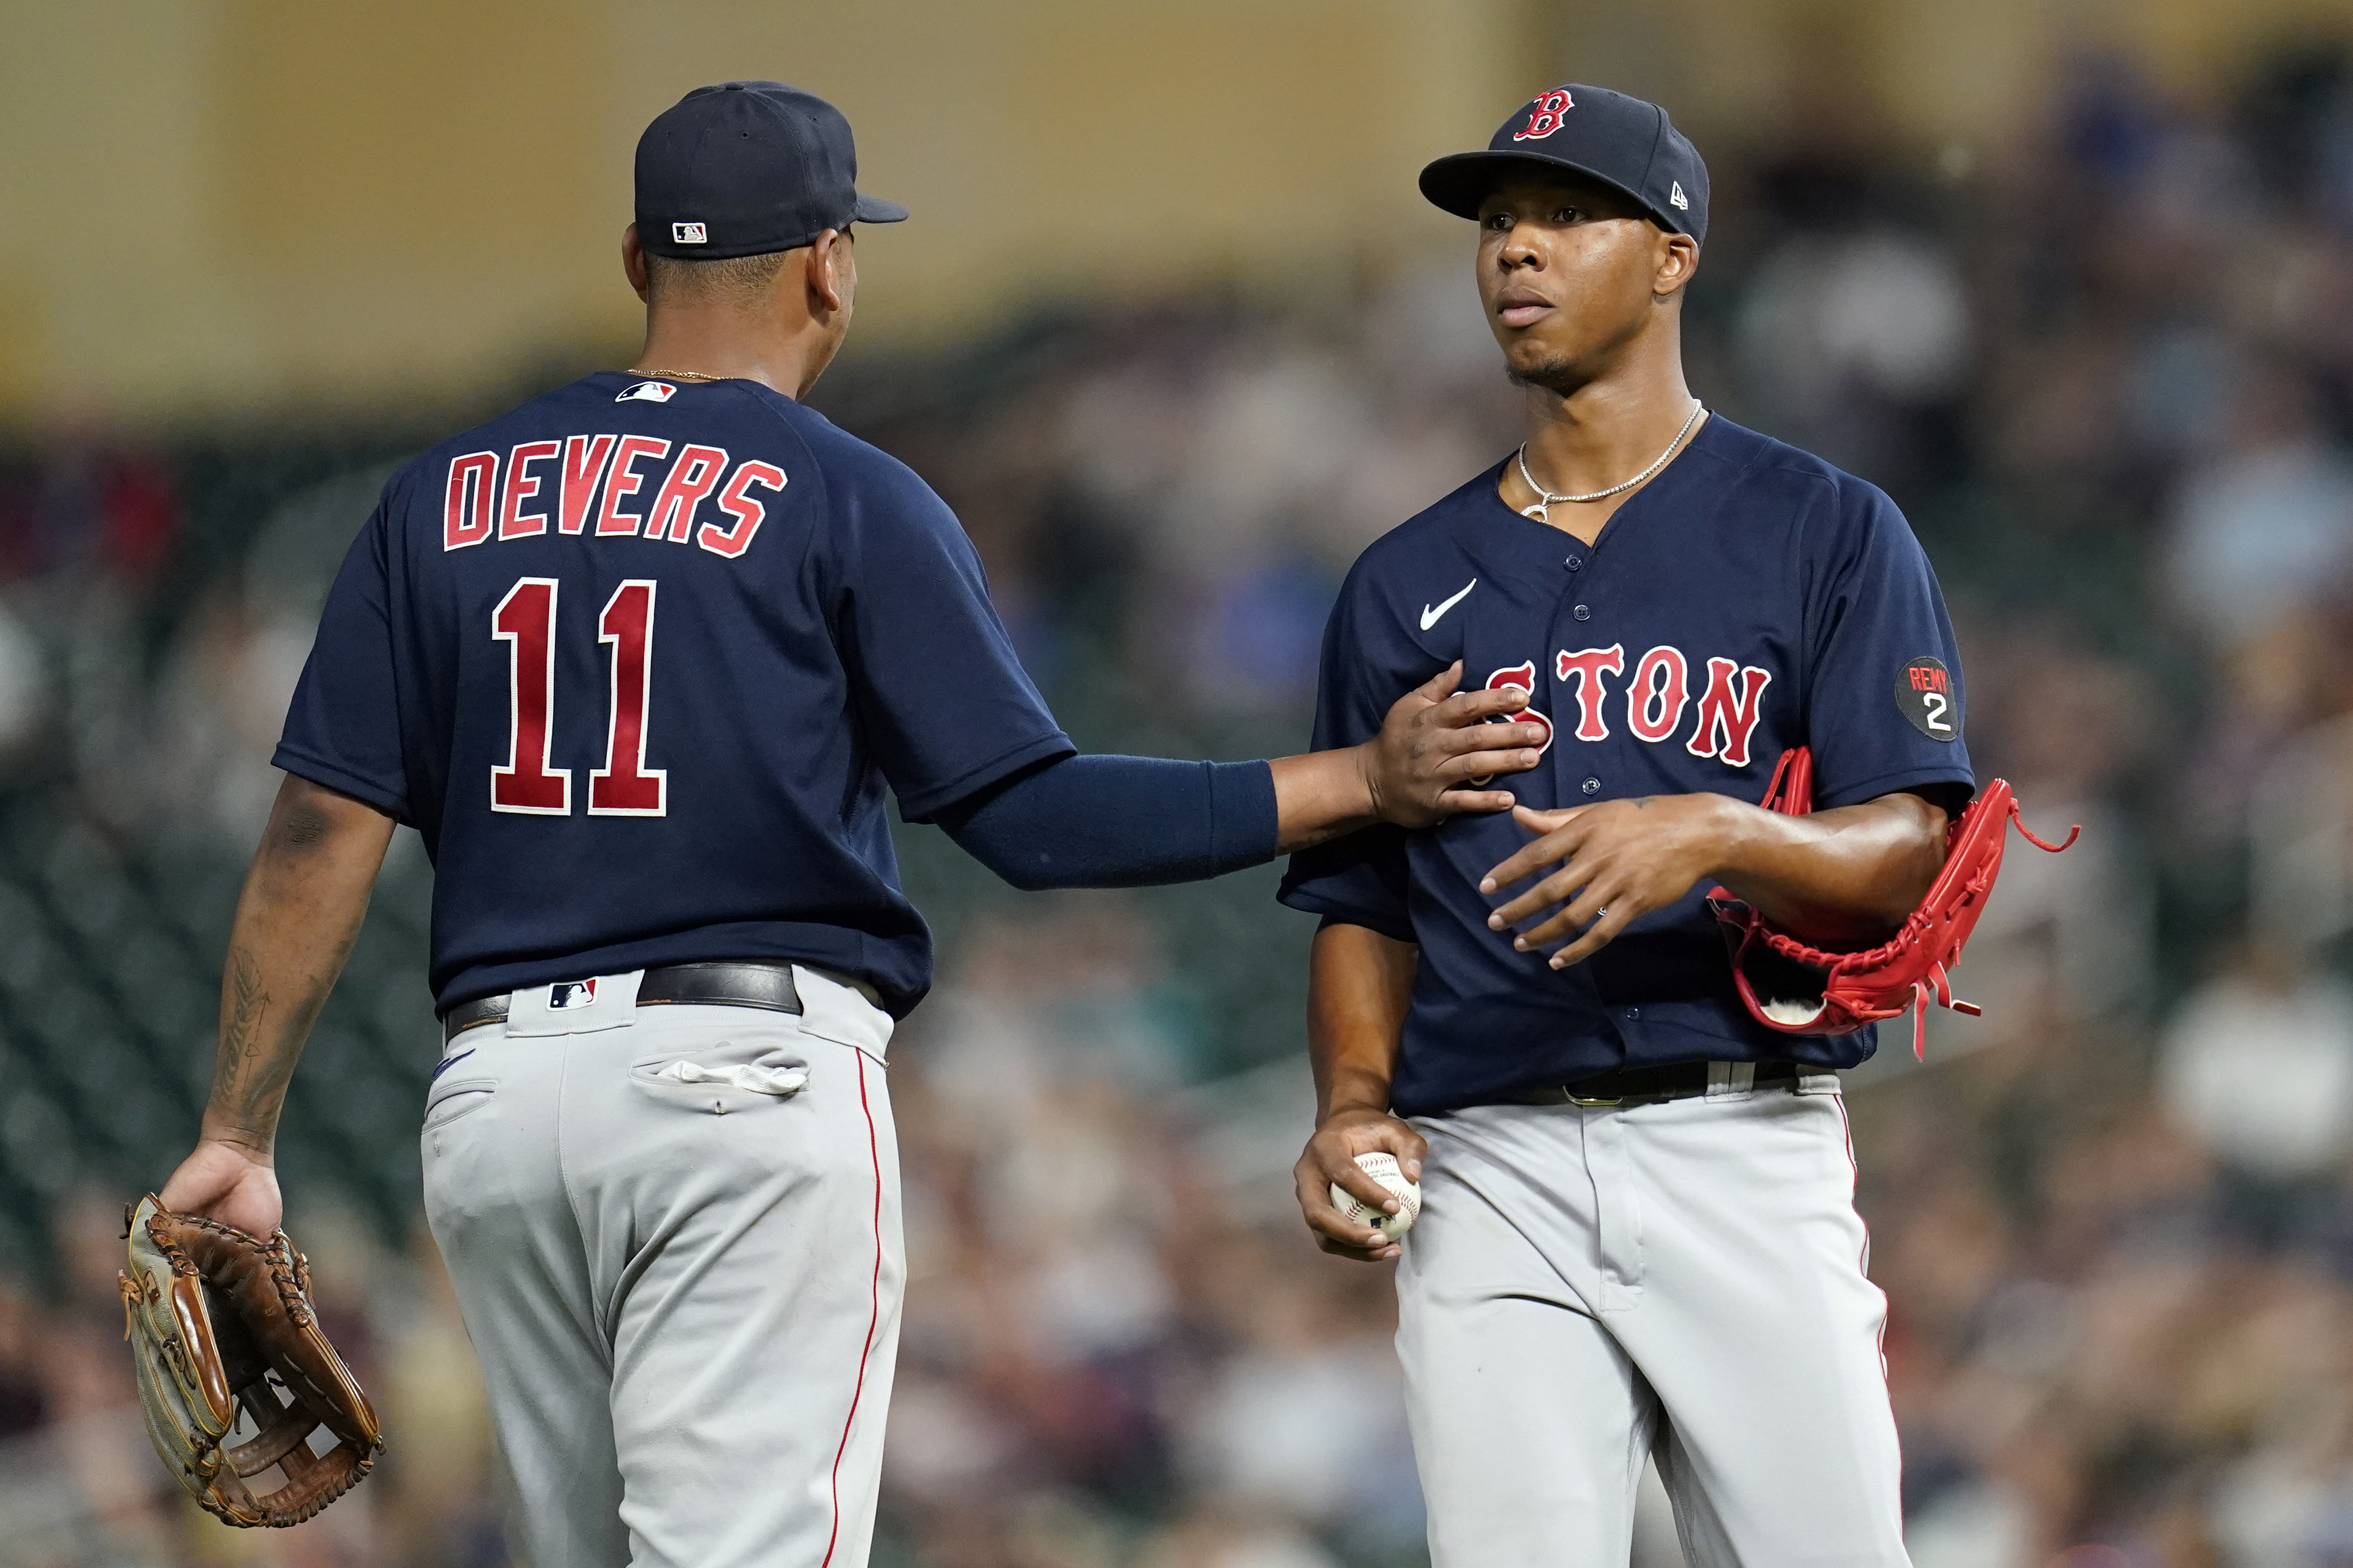 Boston Red Sox, Minnesota Twins open spring with tones festive, somber